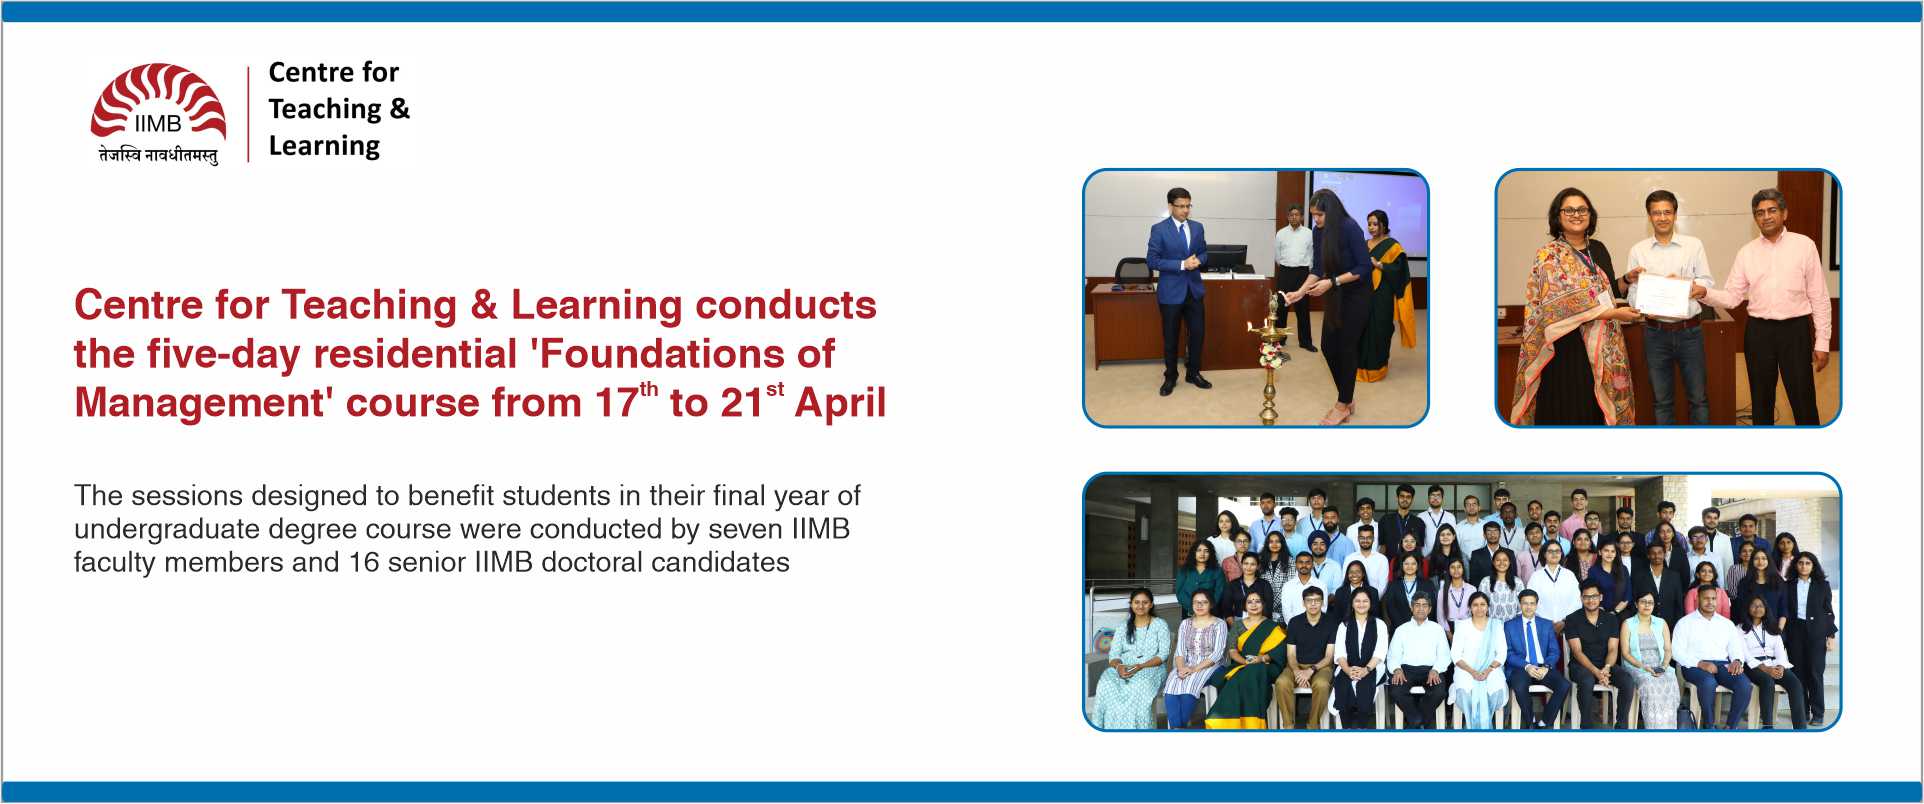 Centre for Teaching & Learning conducts the five-day residential ‘Foundations of Management’ course from 17th to 21st April